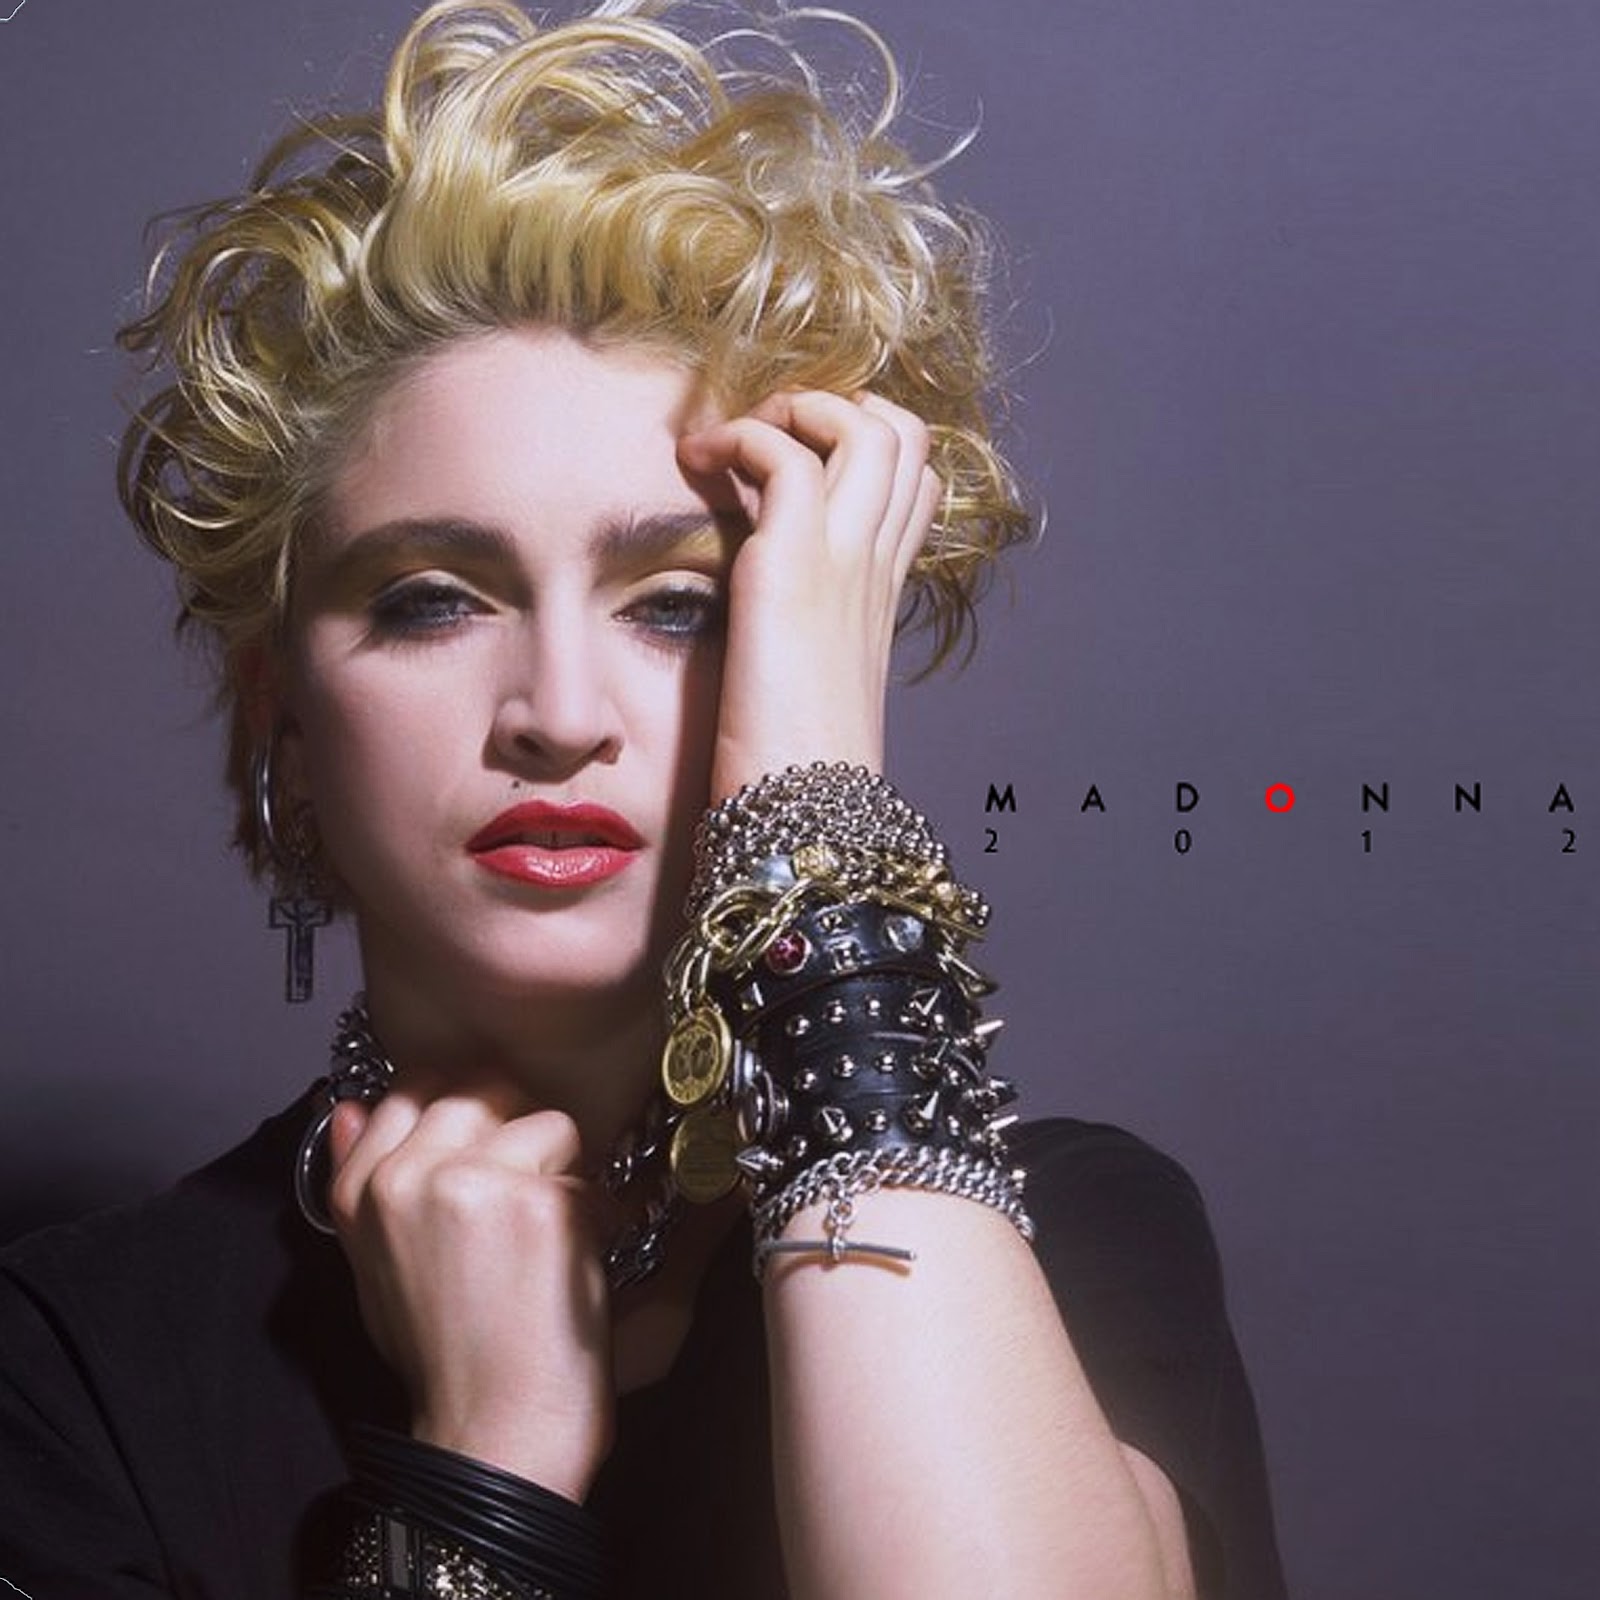 Madonna Fanmade Covers Madonna 2012